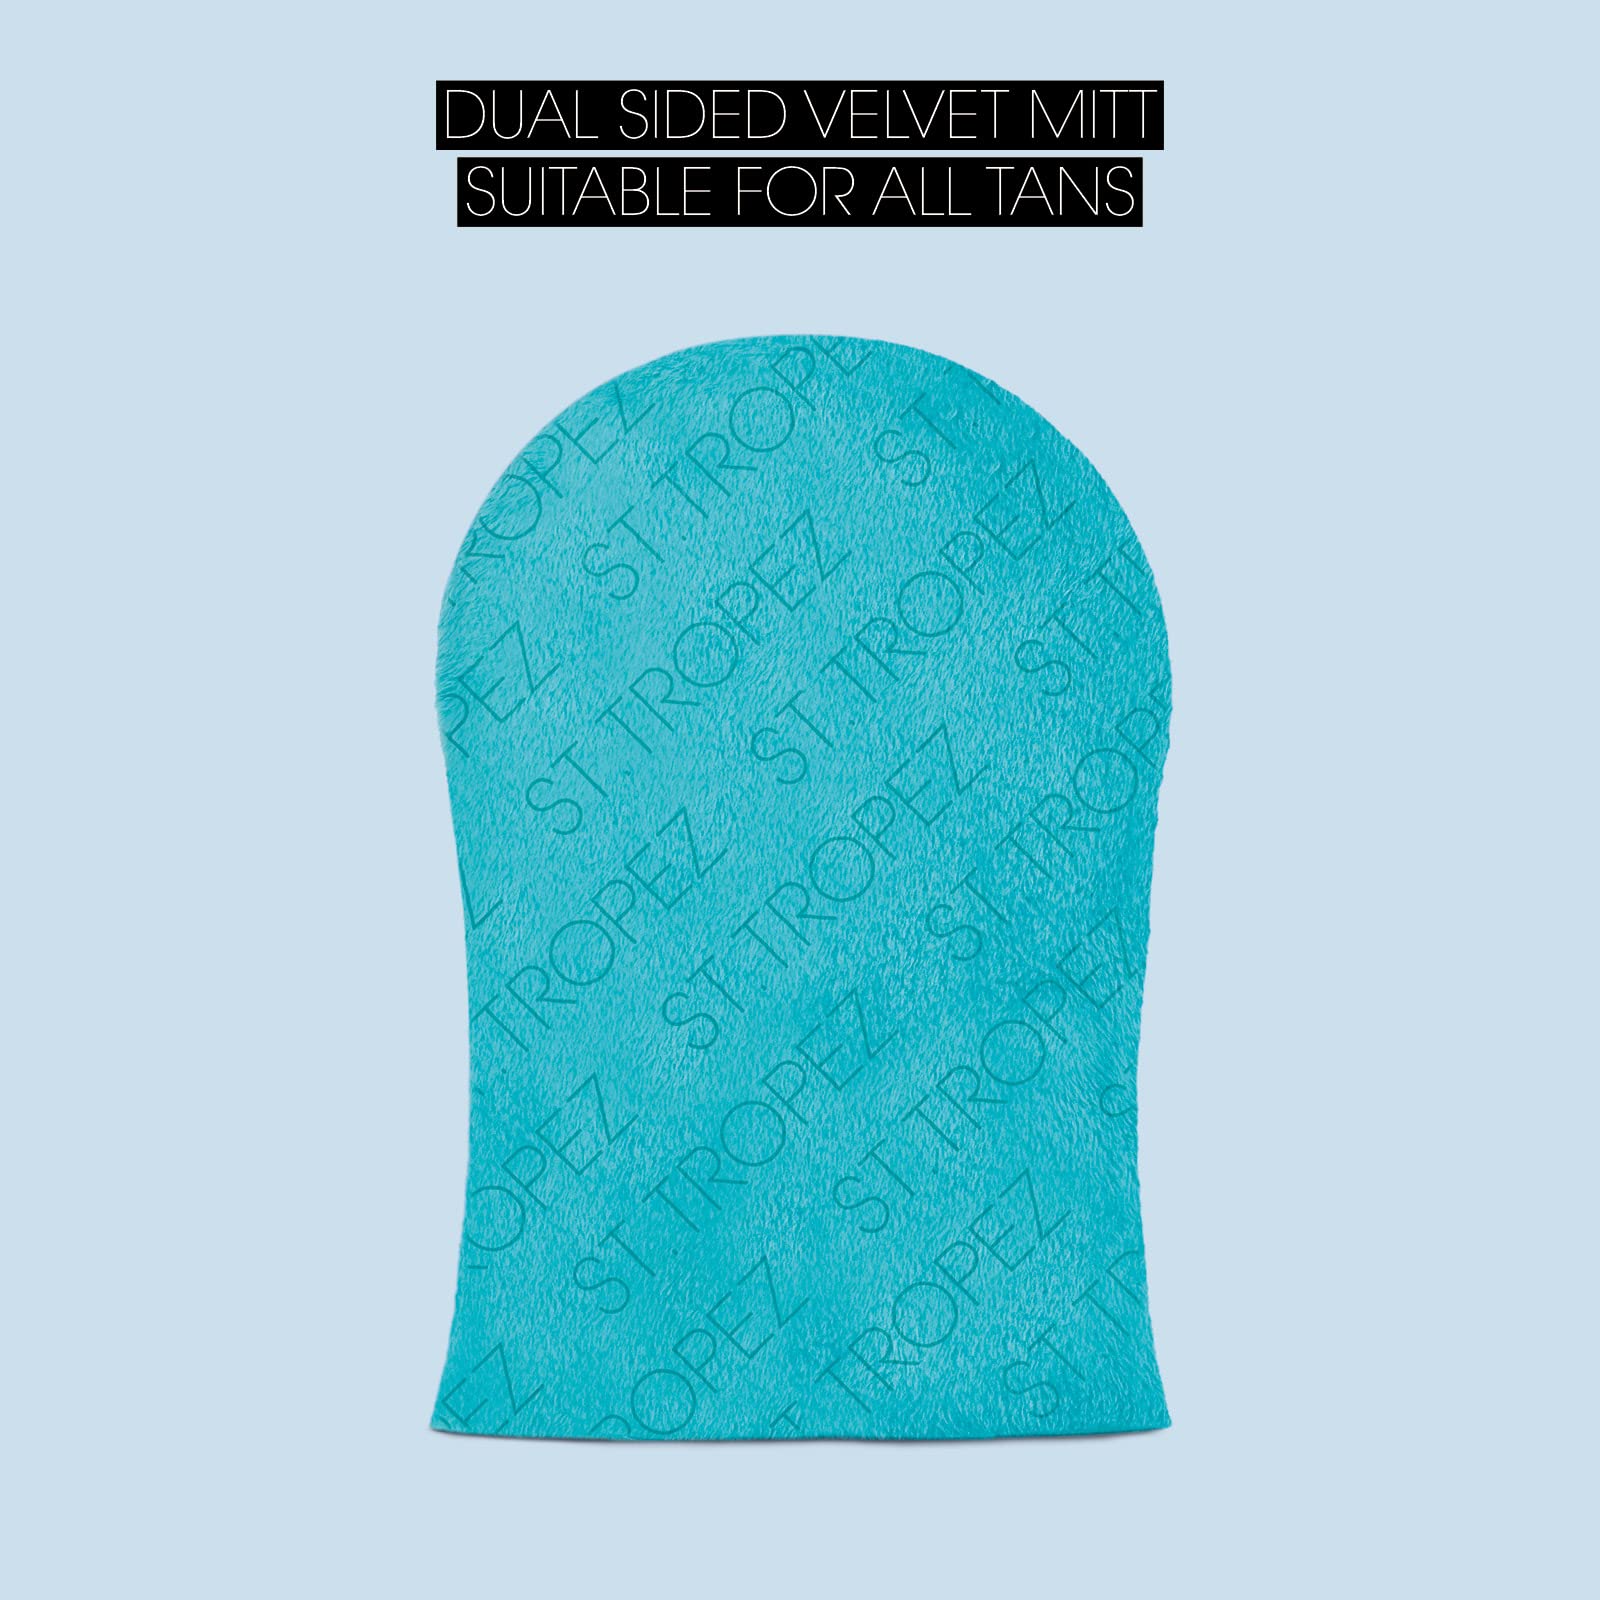 St.Tropez Double-Sided Luxe Velvet Applicator Mitt, Soft Self Tanning Mitt for a Flawless Finish, Waterproof Tanning Mitt for a Smooth and Even Self Tan, Ultimate Mitt for Self Tanner, 1 ct